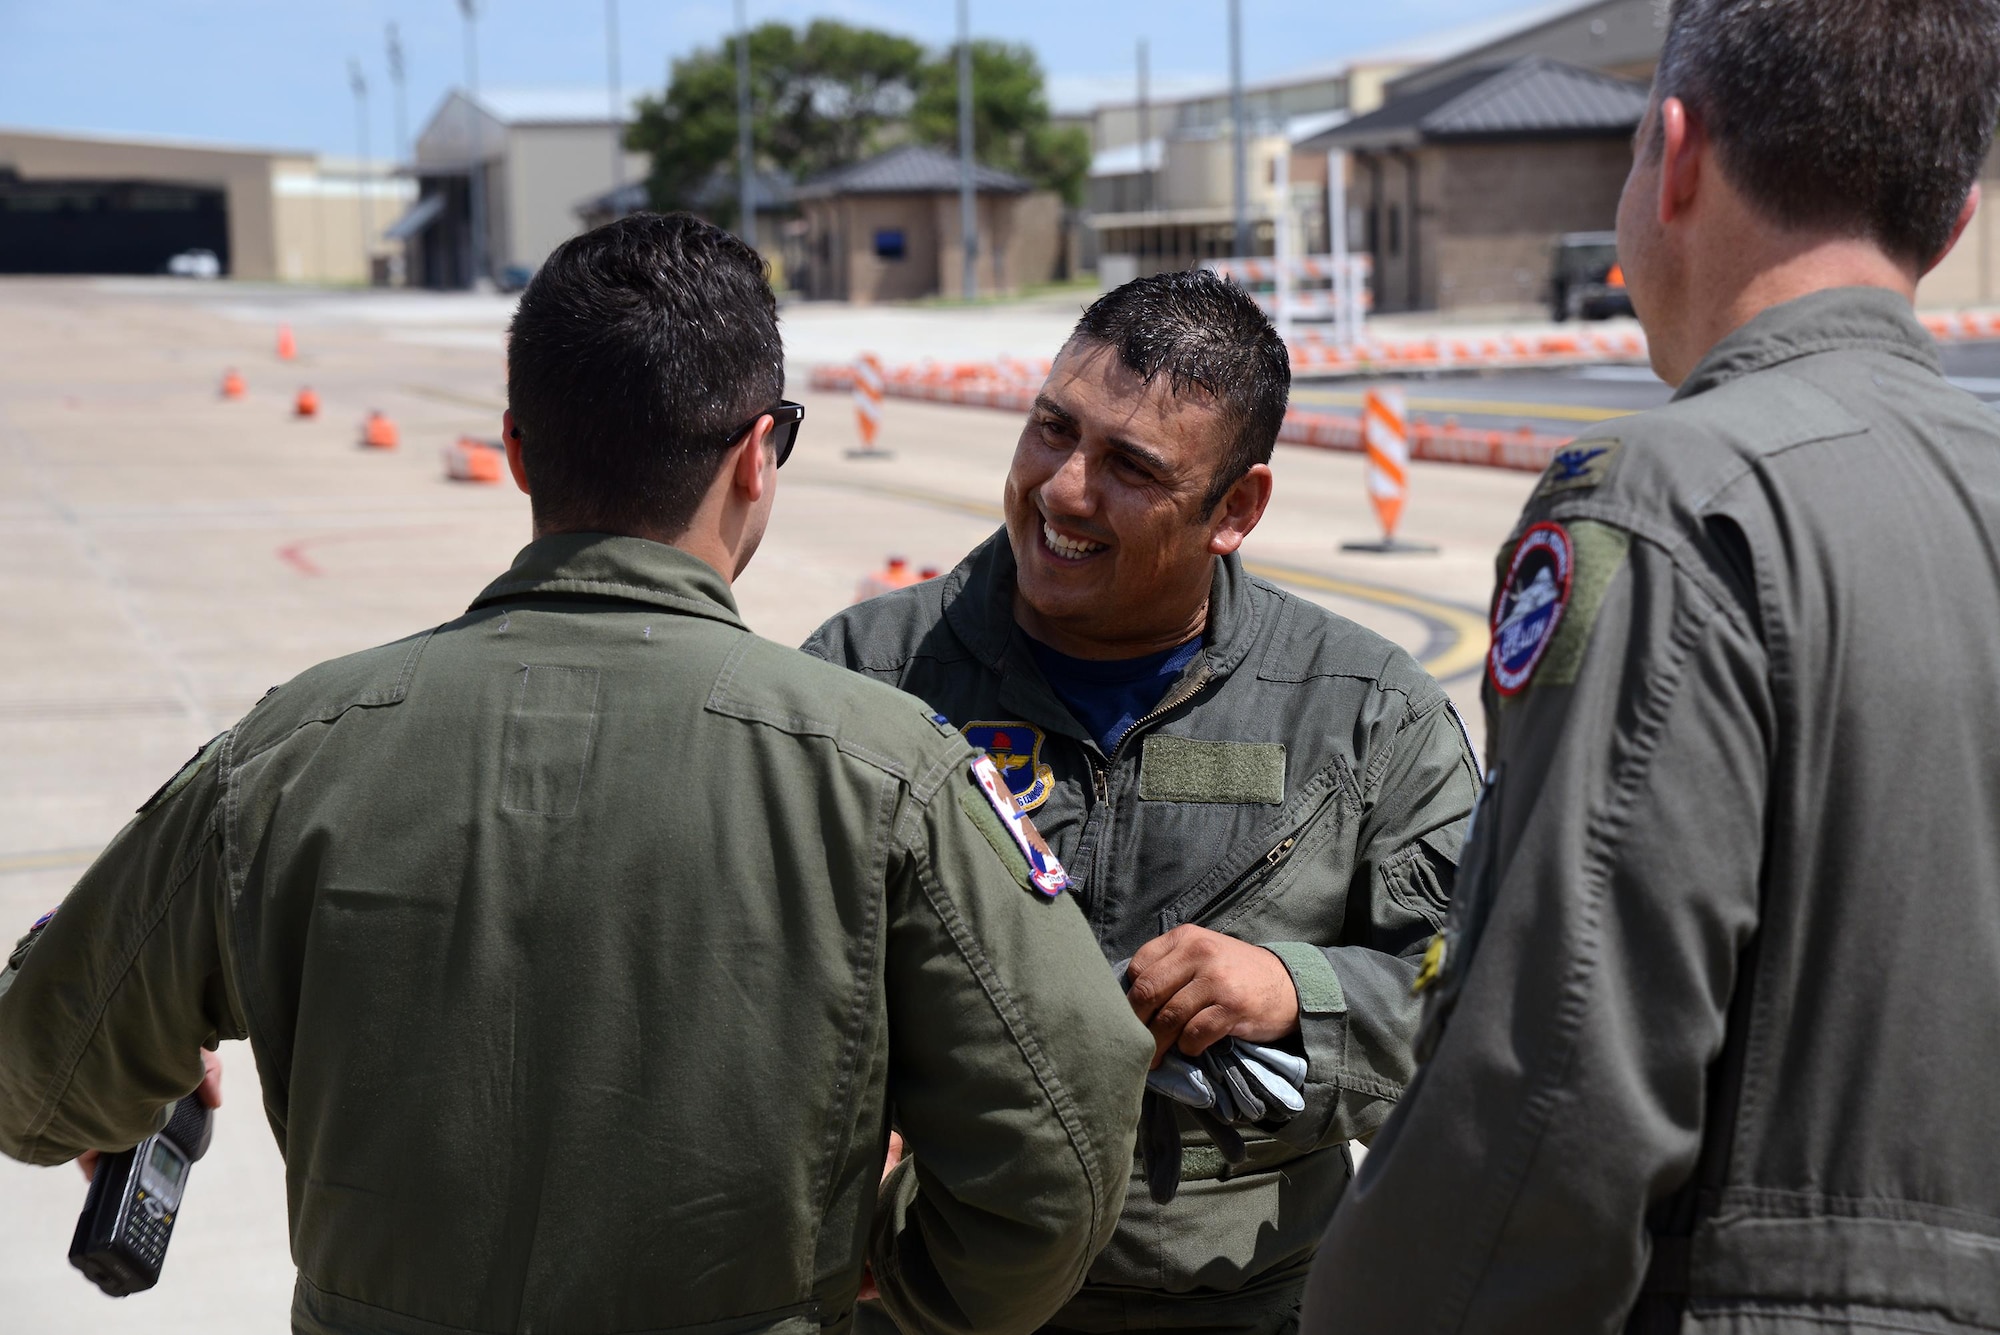 Jorge Hernandez, 47th Maintenance Directorate T-6 Texan II A-Cell crew chief, is congratulated by members of the 434th Flying Training Squadron following an orientation flight on Laughlin Air Force Base, Texas, May 20, 2016. Hernandez was awarded the first ever “Crew Chief of the Quarter” award for going above and beyond the call of duty. (U.S. Air Force photo/Airman 1st Class Brandon May)